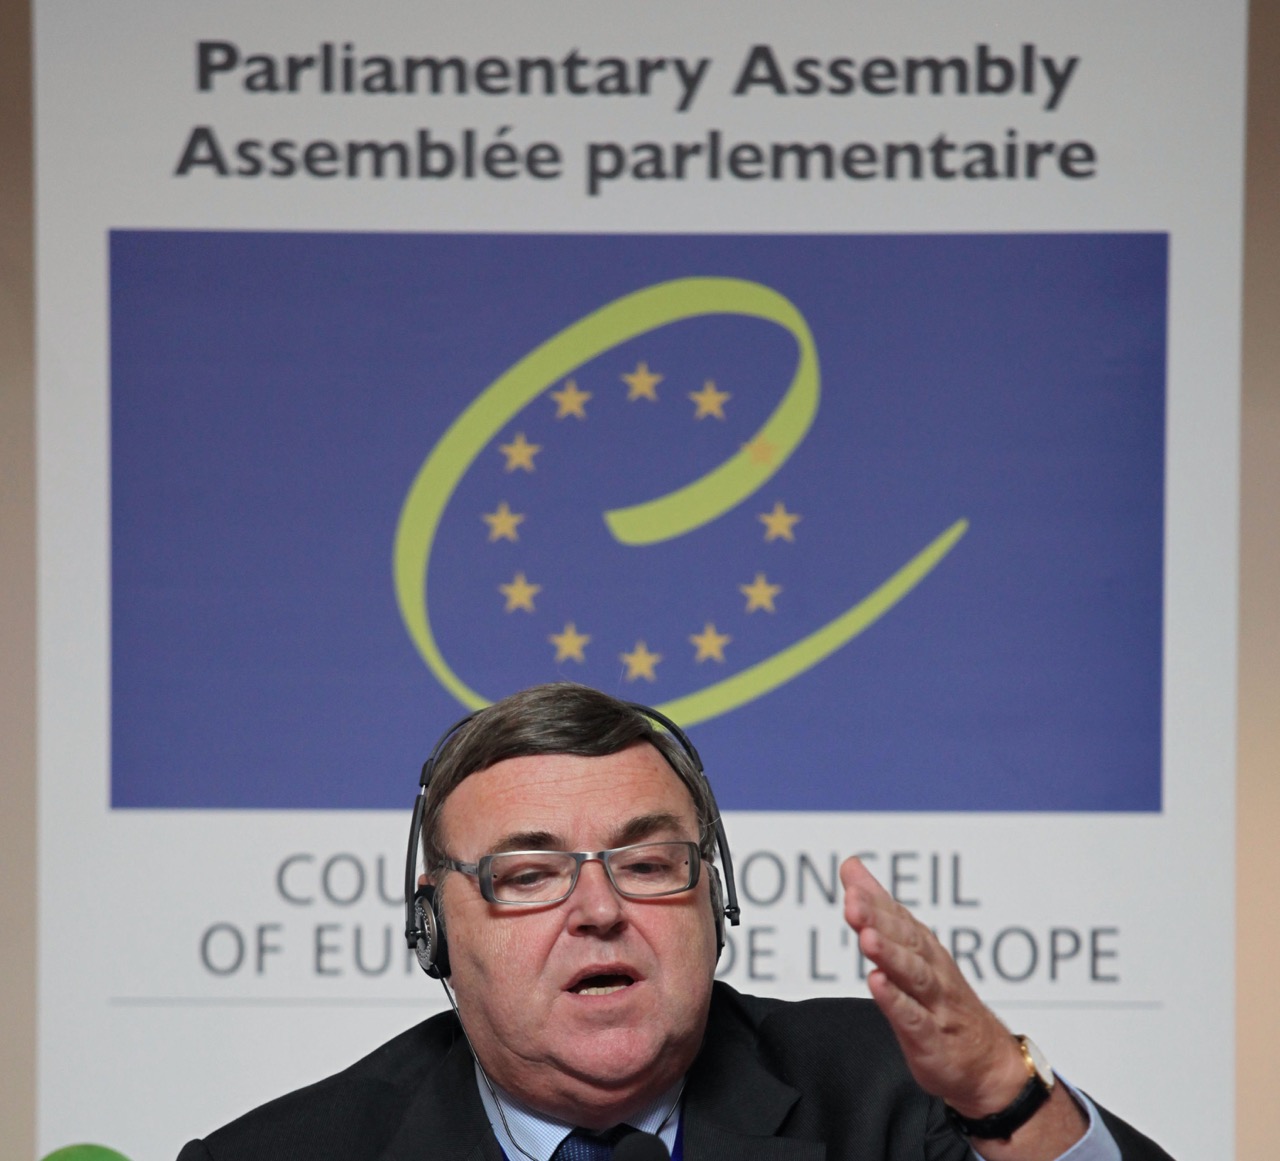 International vote monitor Paul Wille from the European Parliamentary Assembly (PACE) speaks on a joint OSCE press conference, one day after parliamentary elections in Baku, Azerbaijan, on 8 November 2010